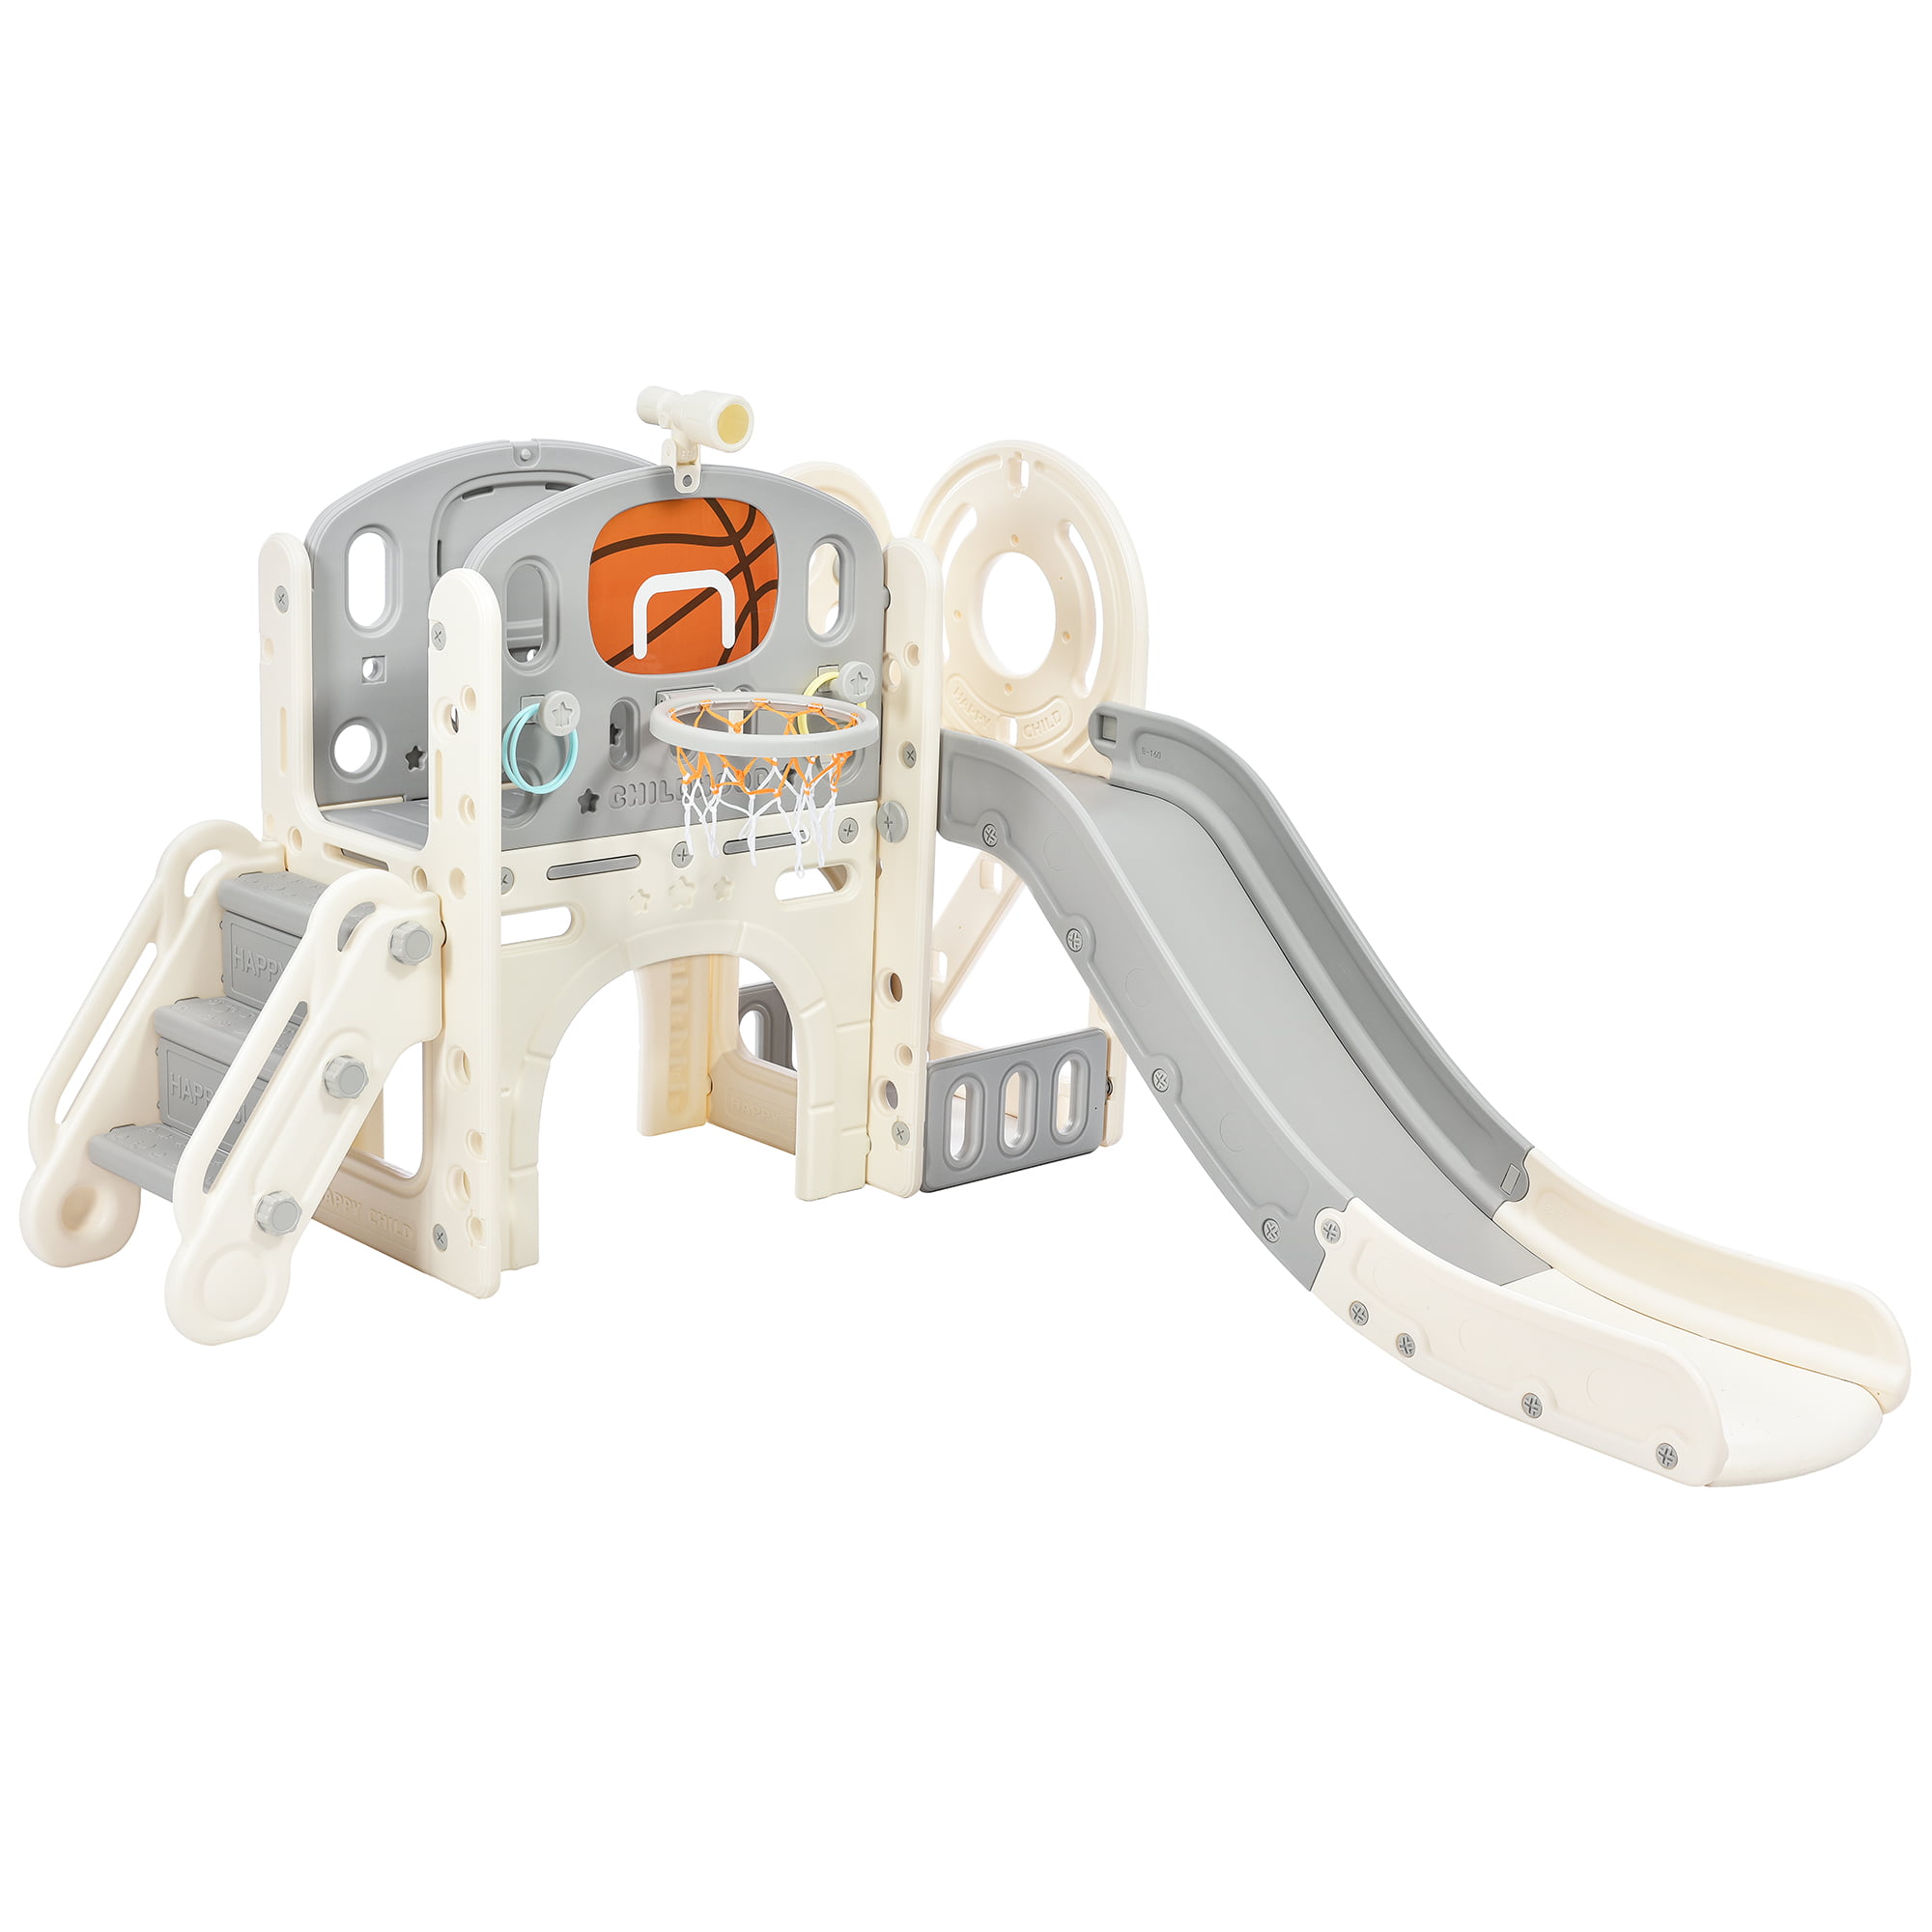 Crawling Castle Climbing Playhouse with Slide